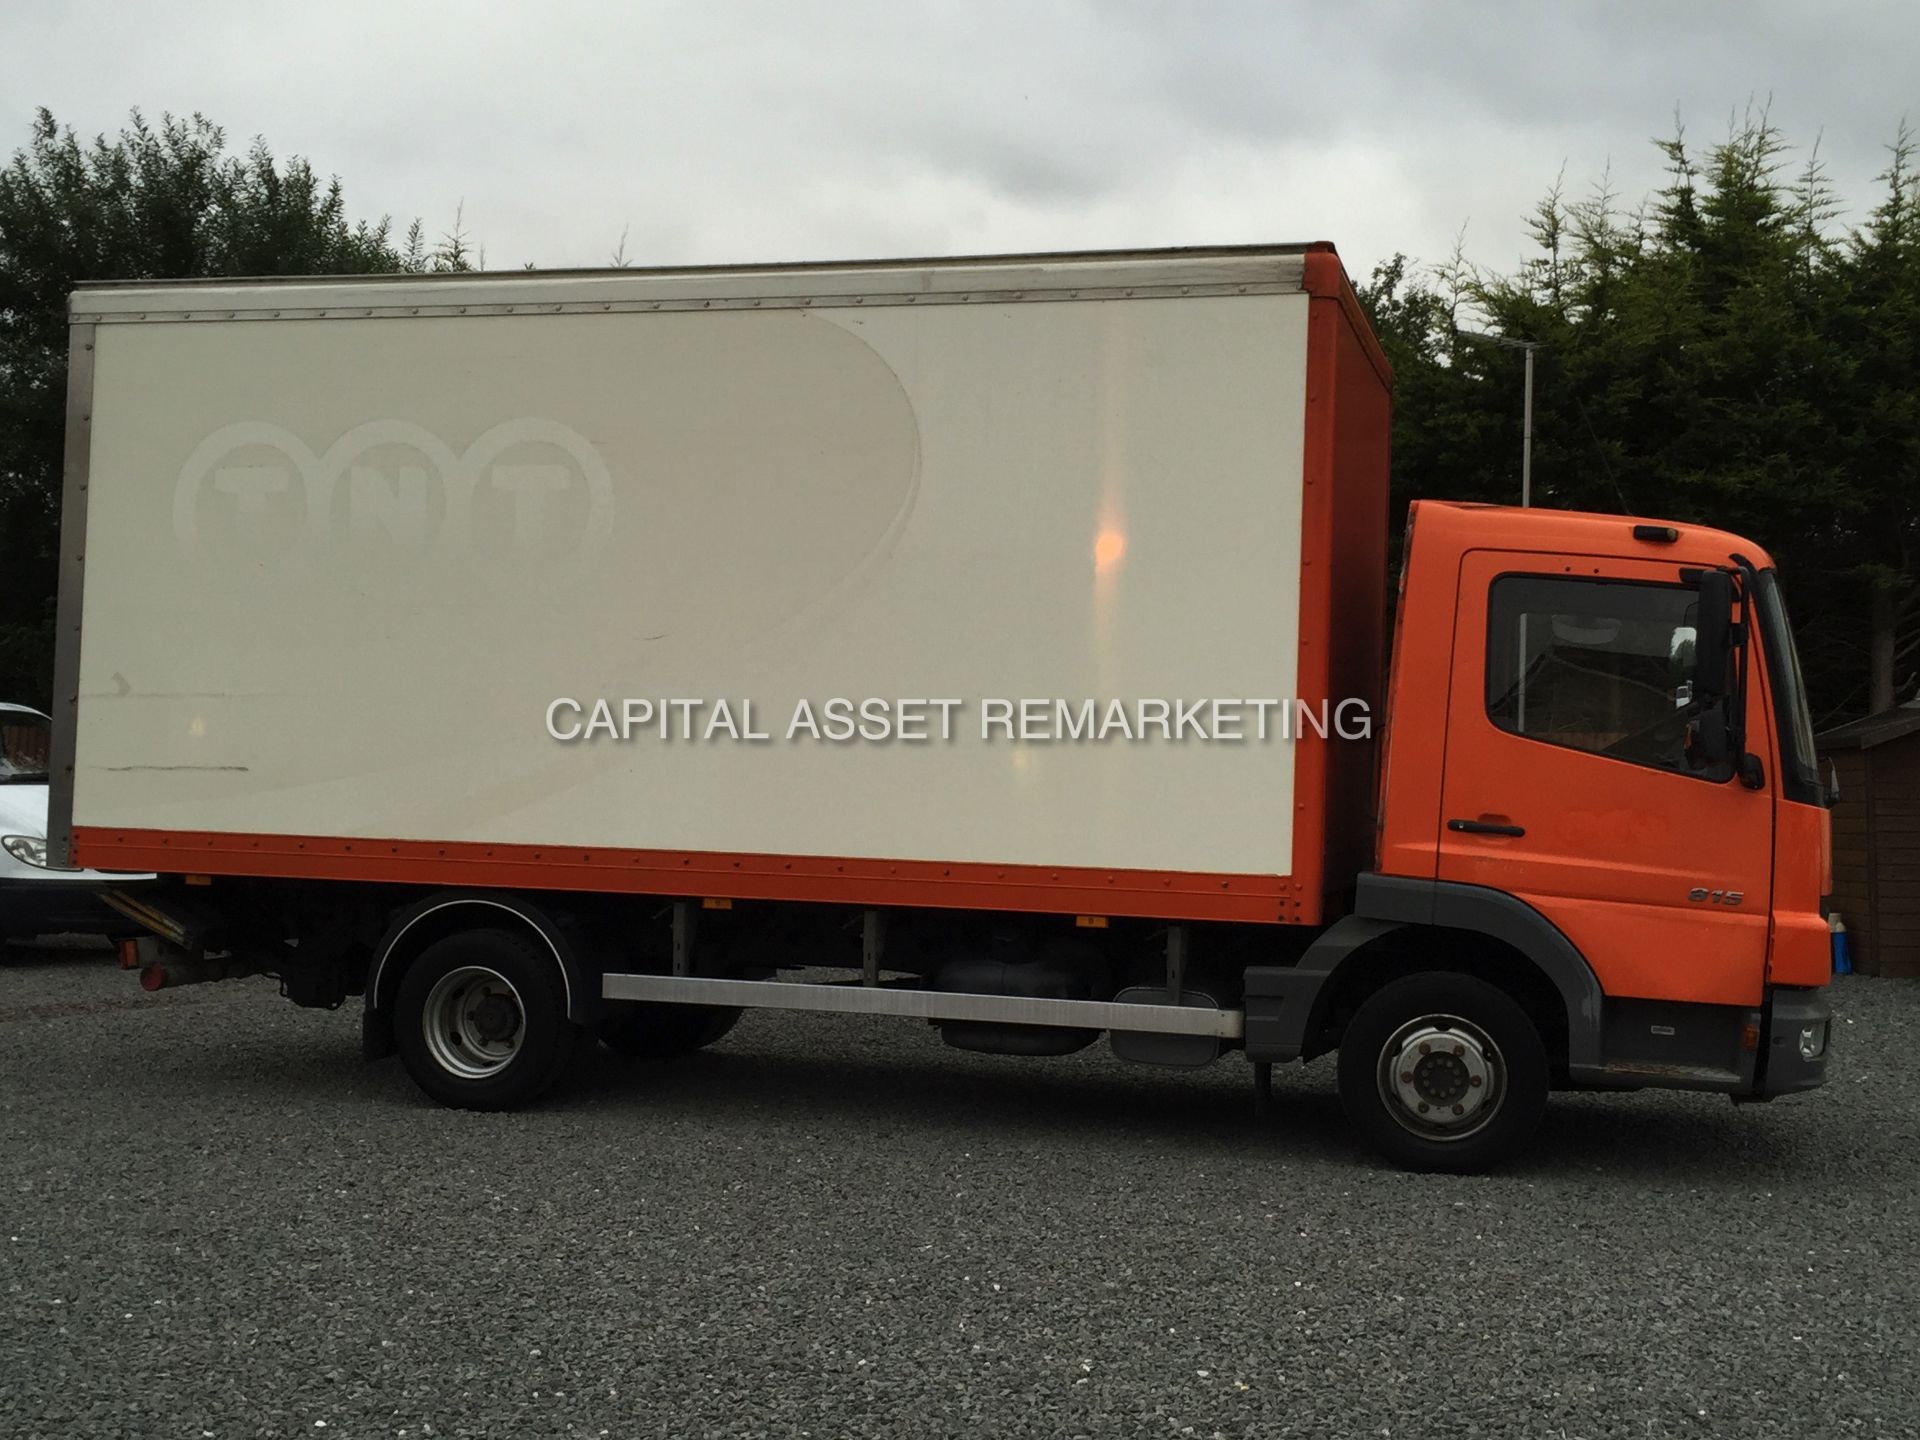 MERCEDES ATEGO 815 (2006 - 56 REG) 18 FT BOX LORRY **TUCK-AWAY TAIL LIFT** - Image 8 of 11